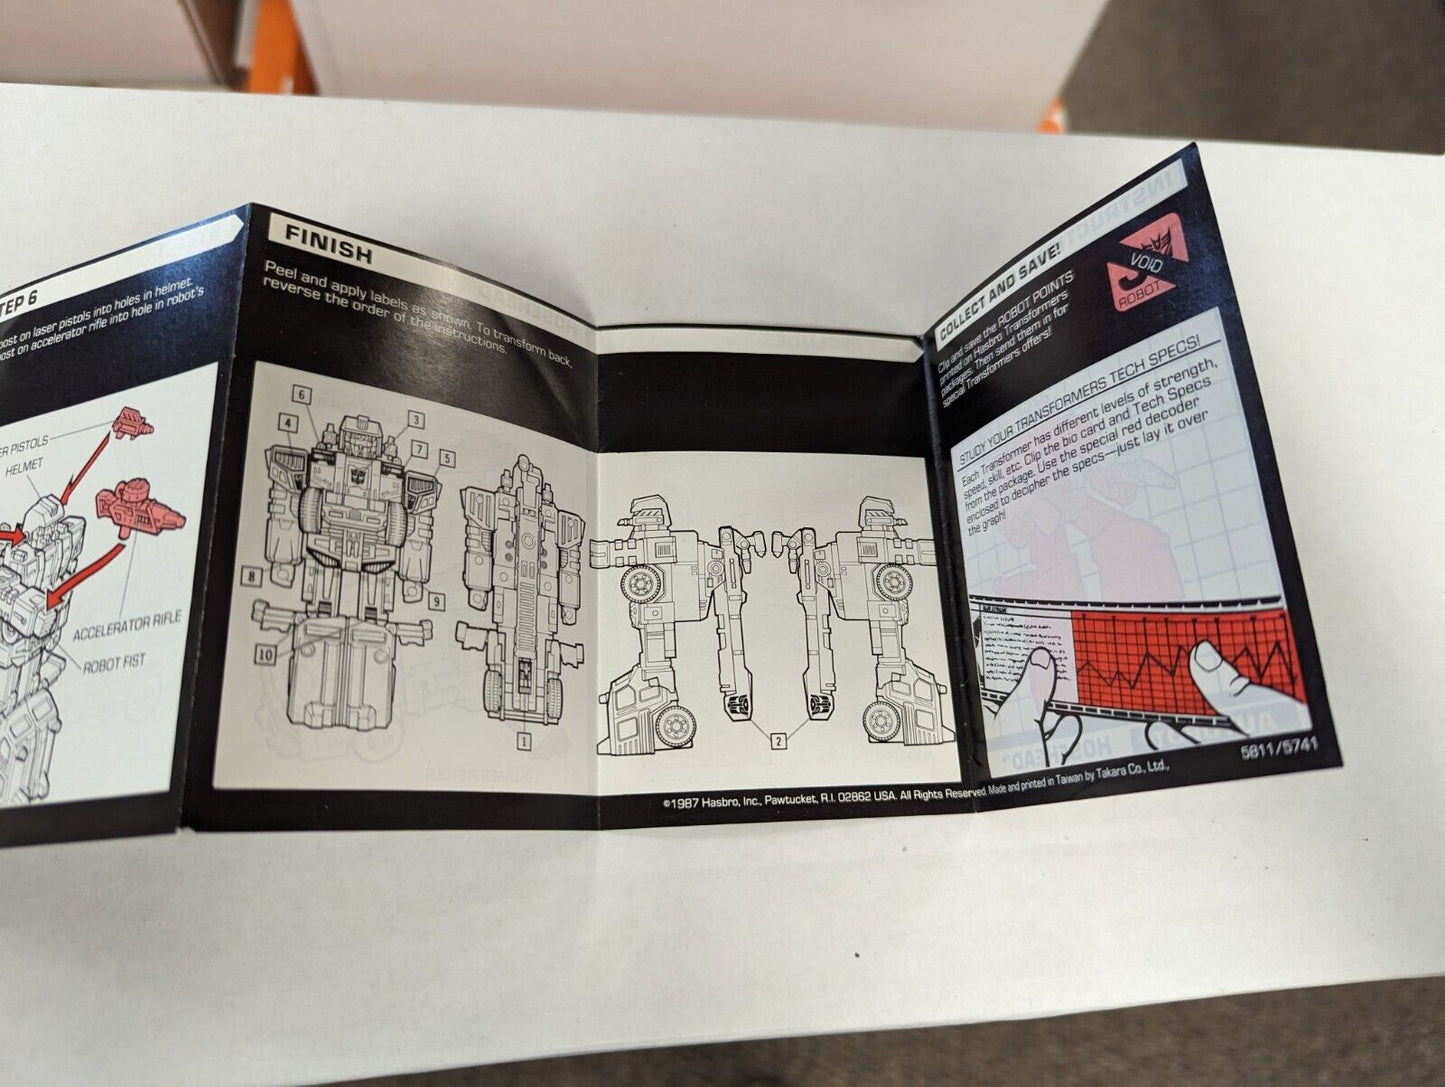 Transformers Hosehead Instruction Booklet Only 1987